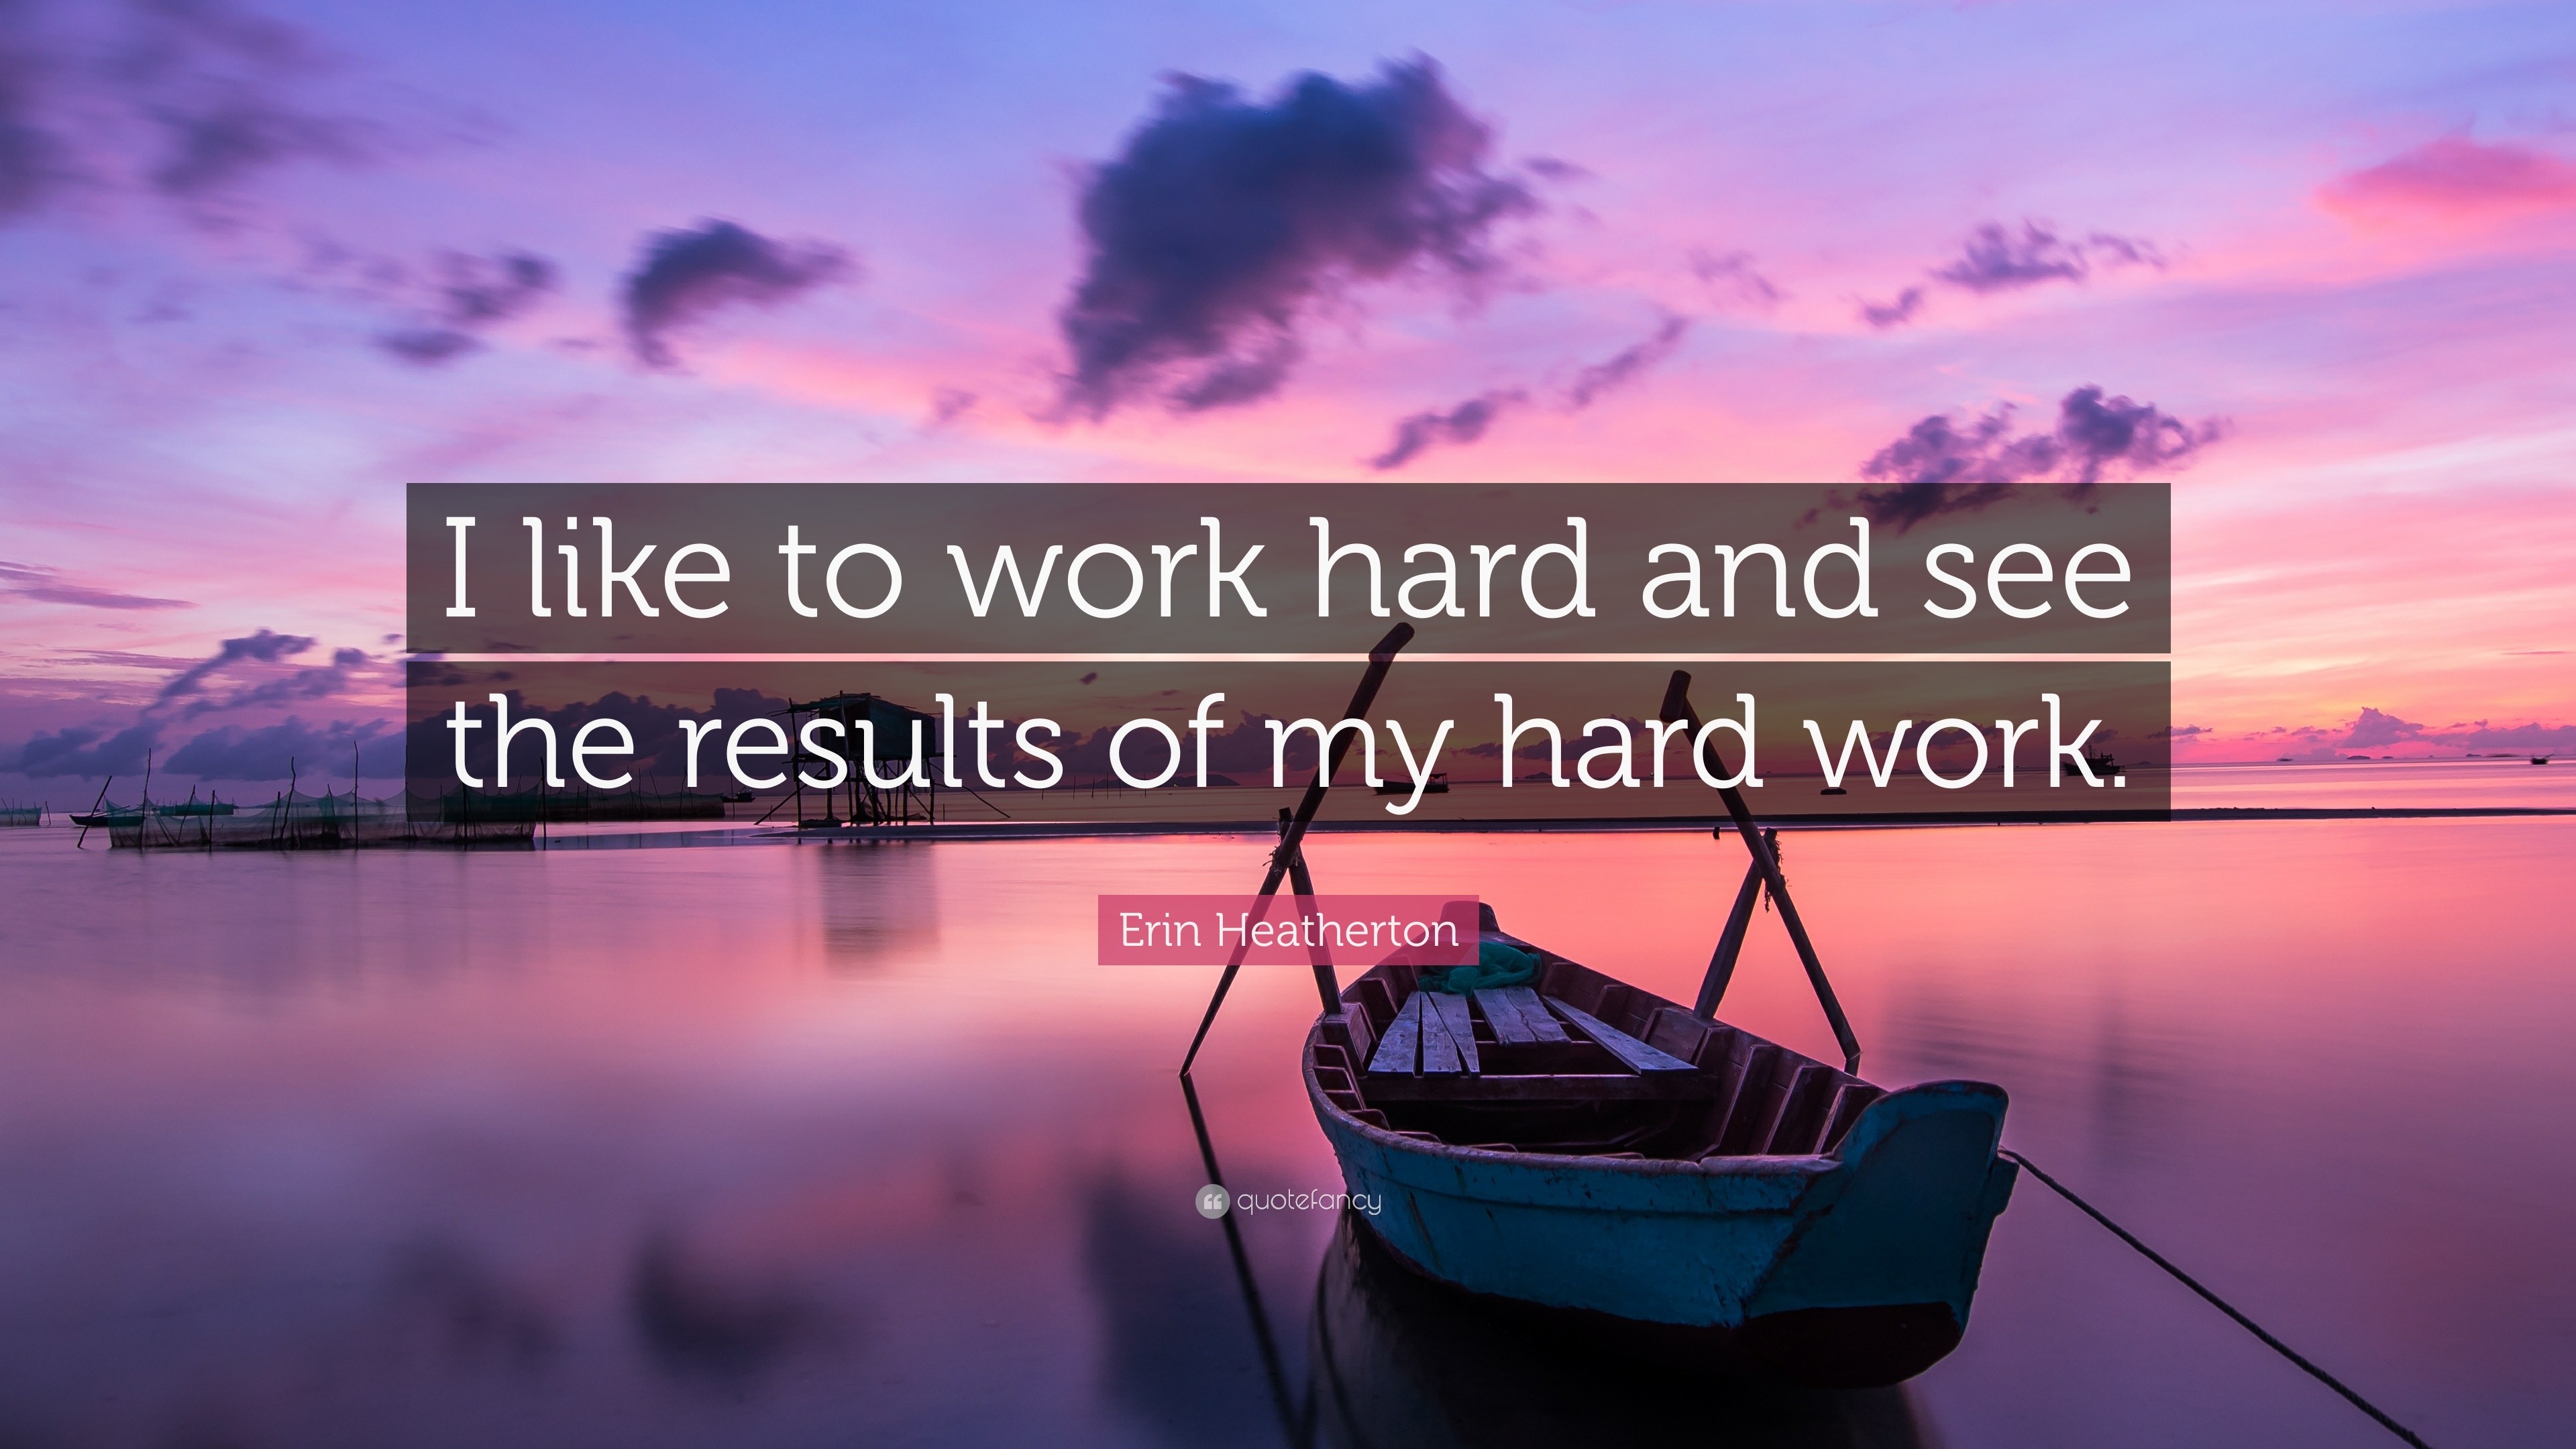 Erin Heatherton Quote: “I like to work hard and see the results of my ...